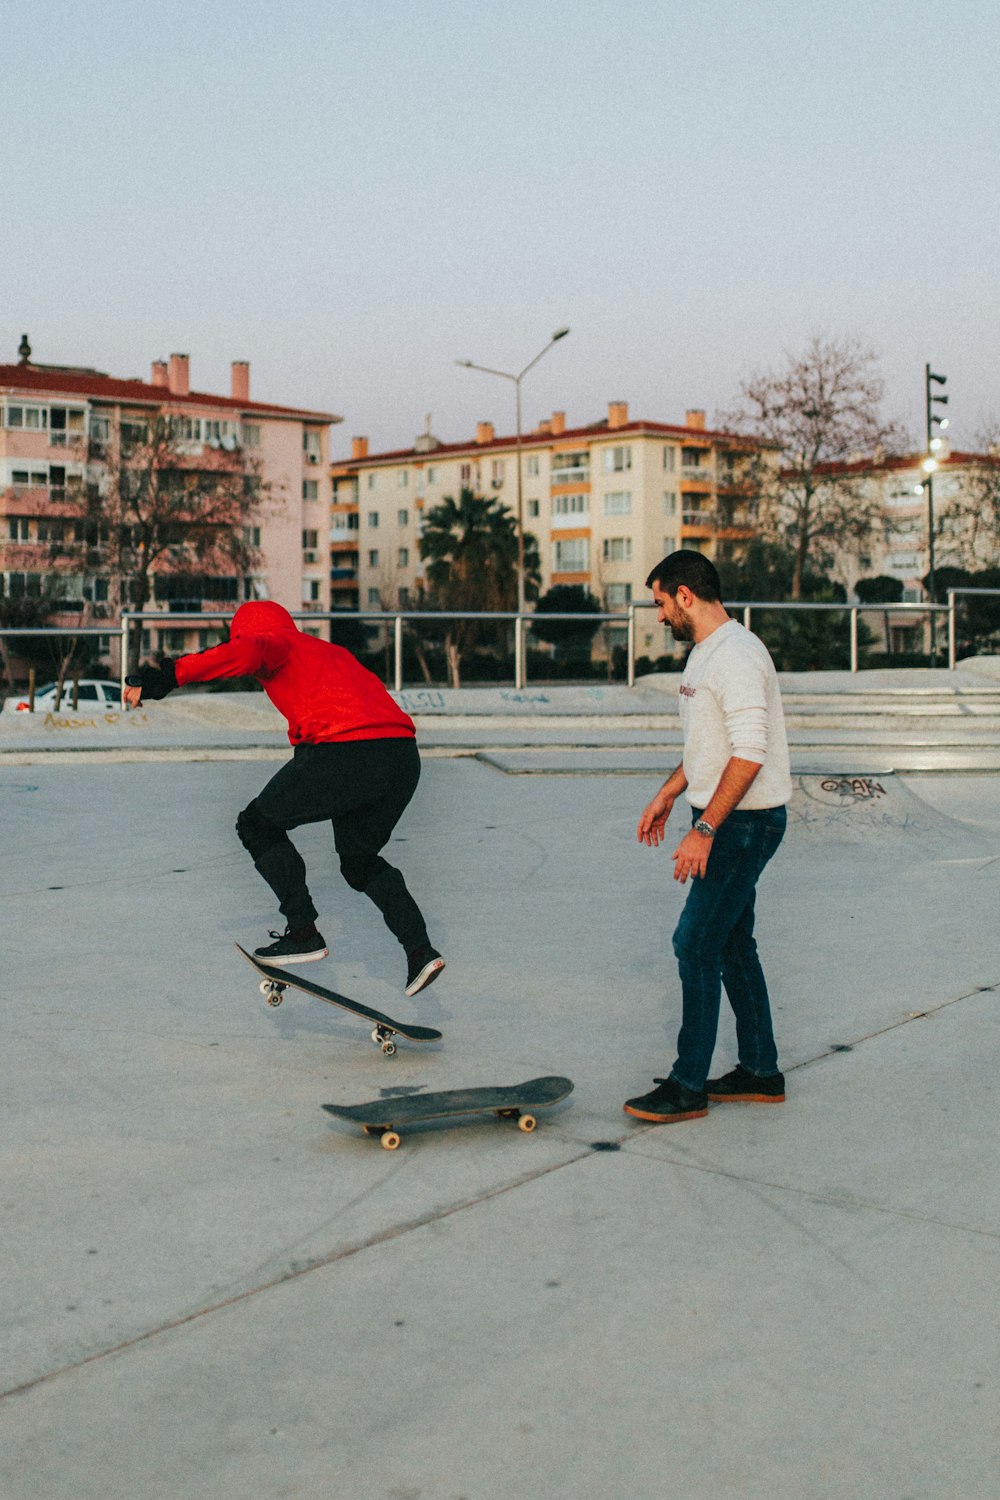 man in red hoodie and woman in white t-shirt riding on black skateboard during daytime